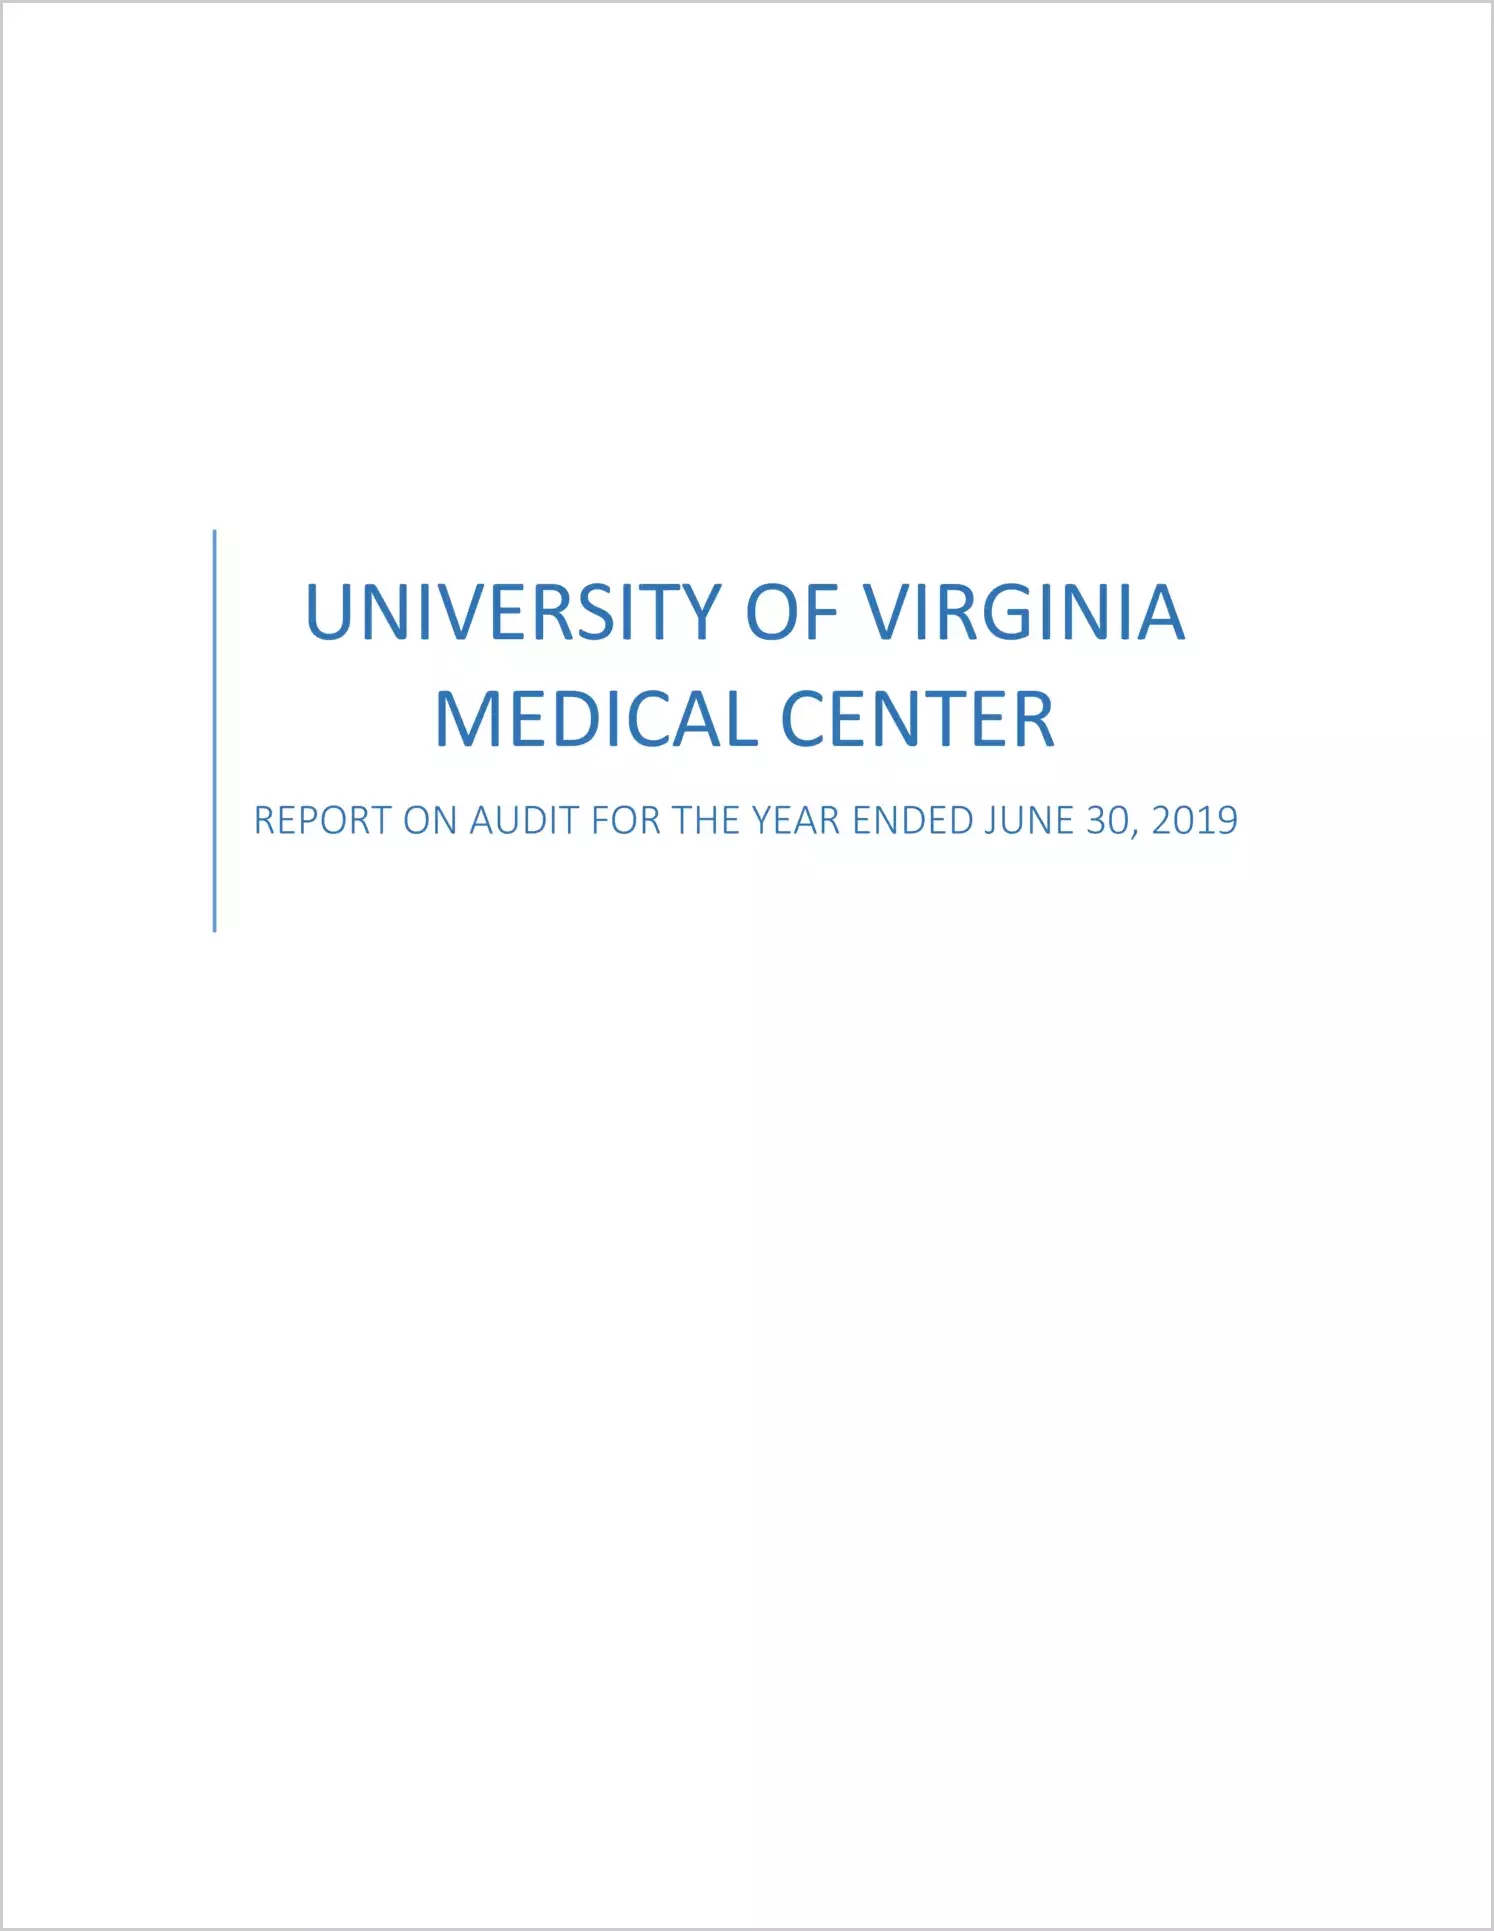 University of Virginia Medical Center Financial Statement for the year ended June 30, 2019